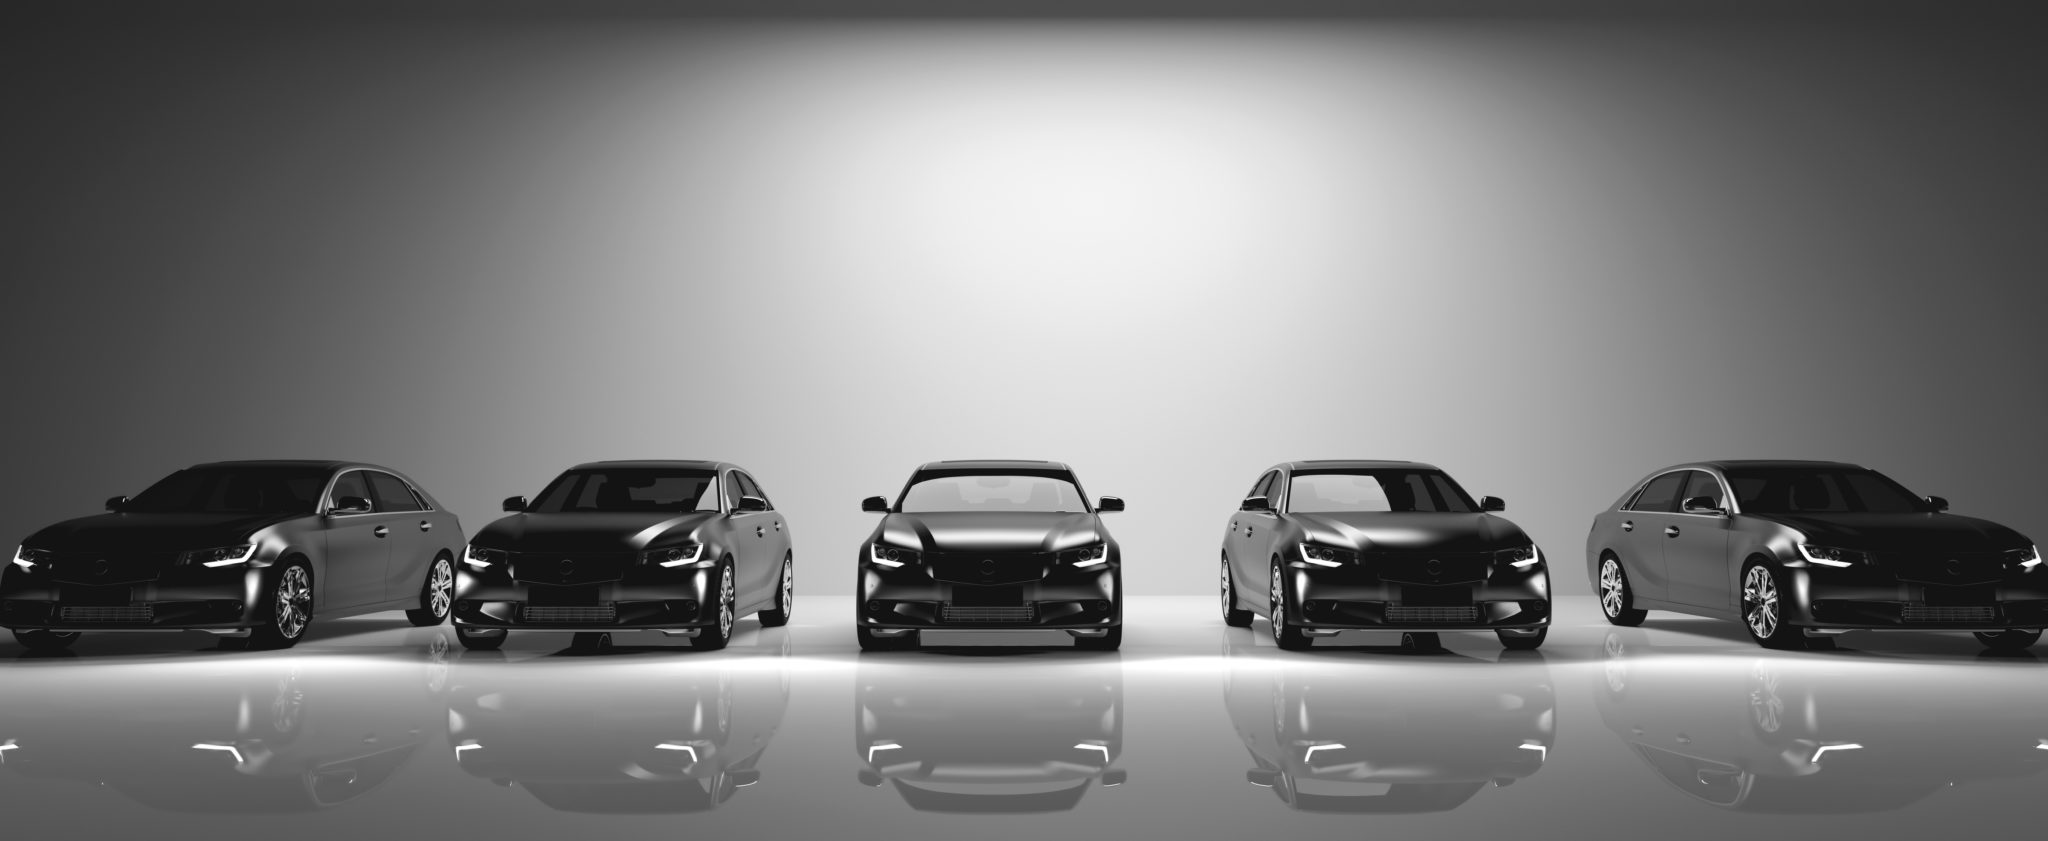 Fleet of black cars on light background to illustrate manufacturers recommendations and vehicle maintenance